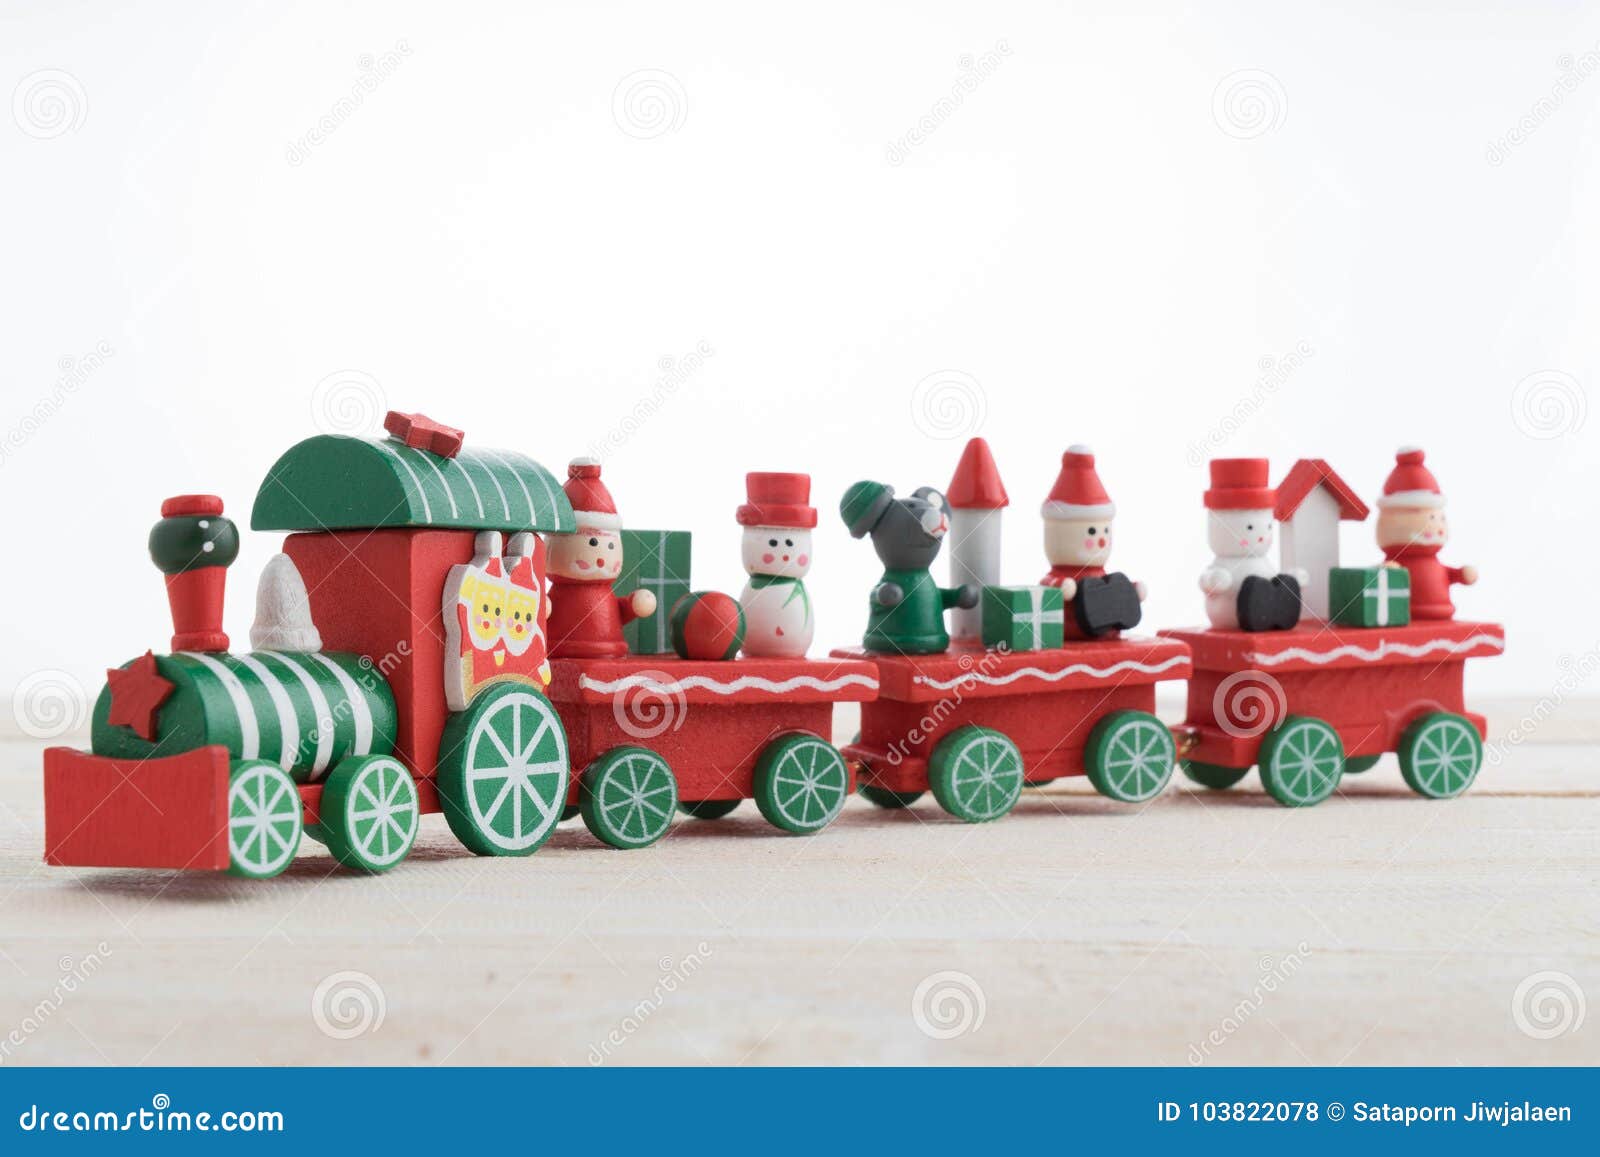 Toy Train on Wooden for Christmas Stock Photo - Image of xmas, tree ...